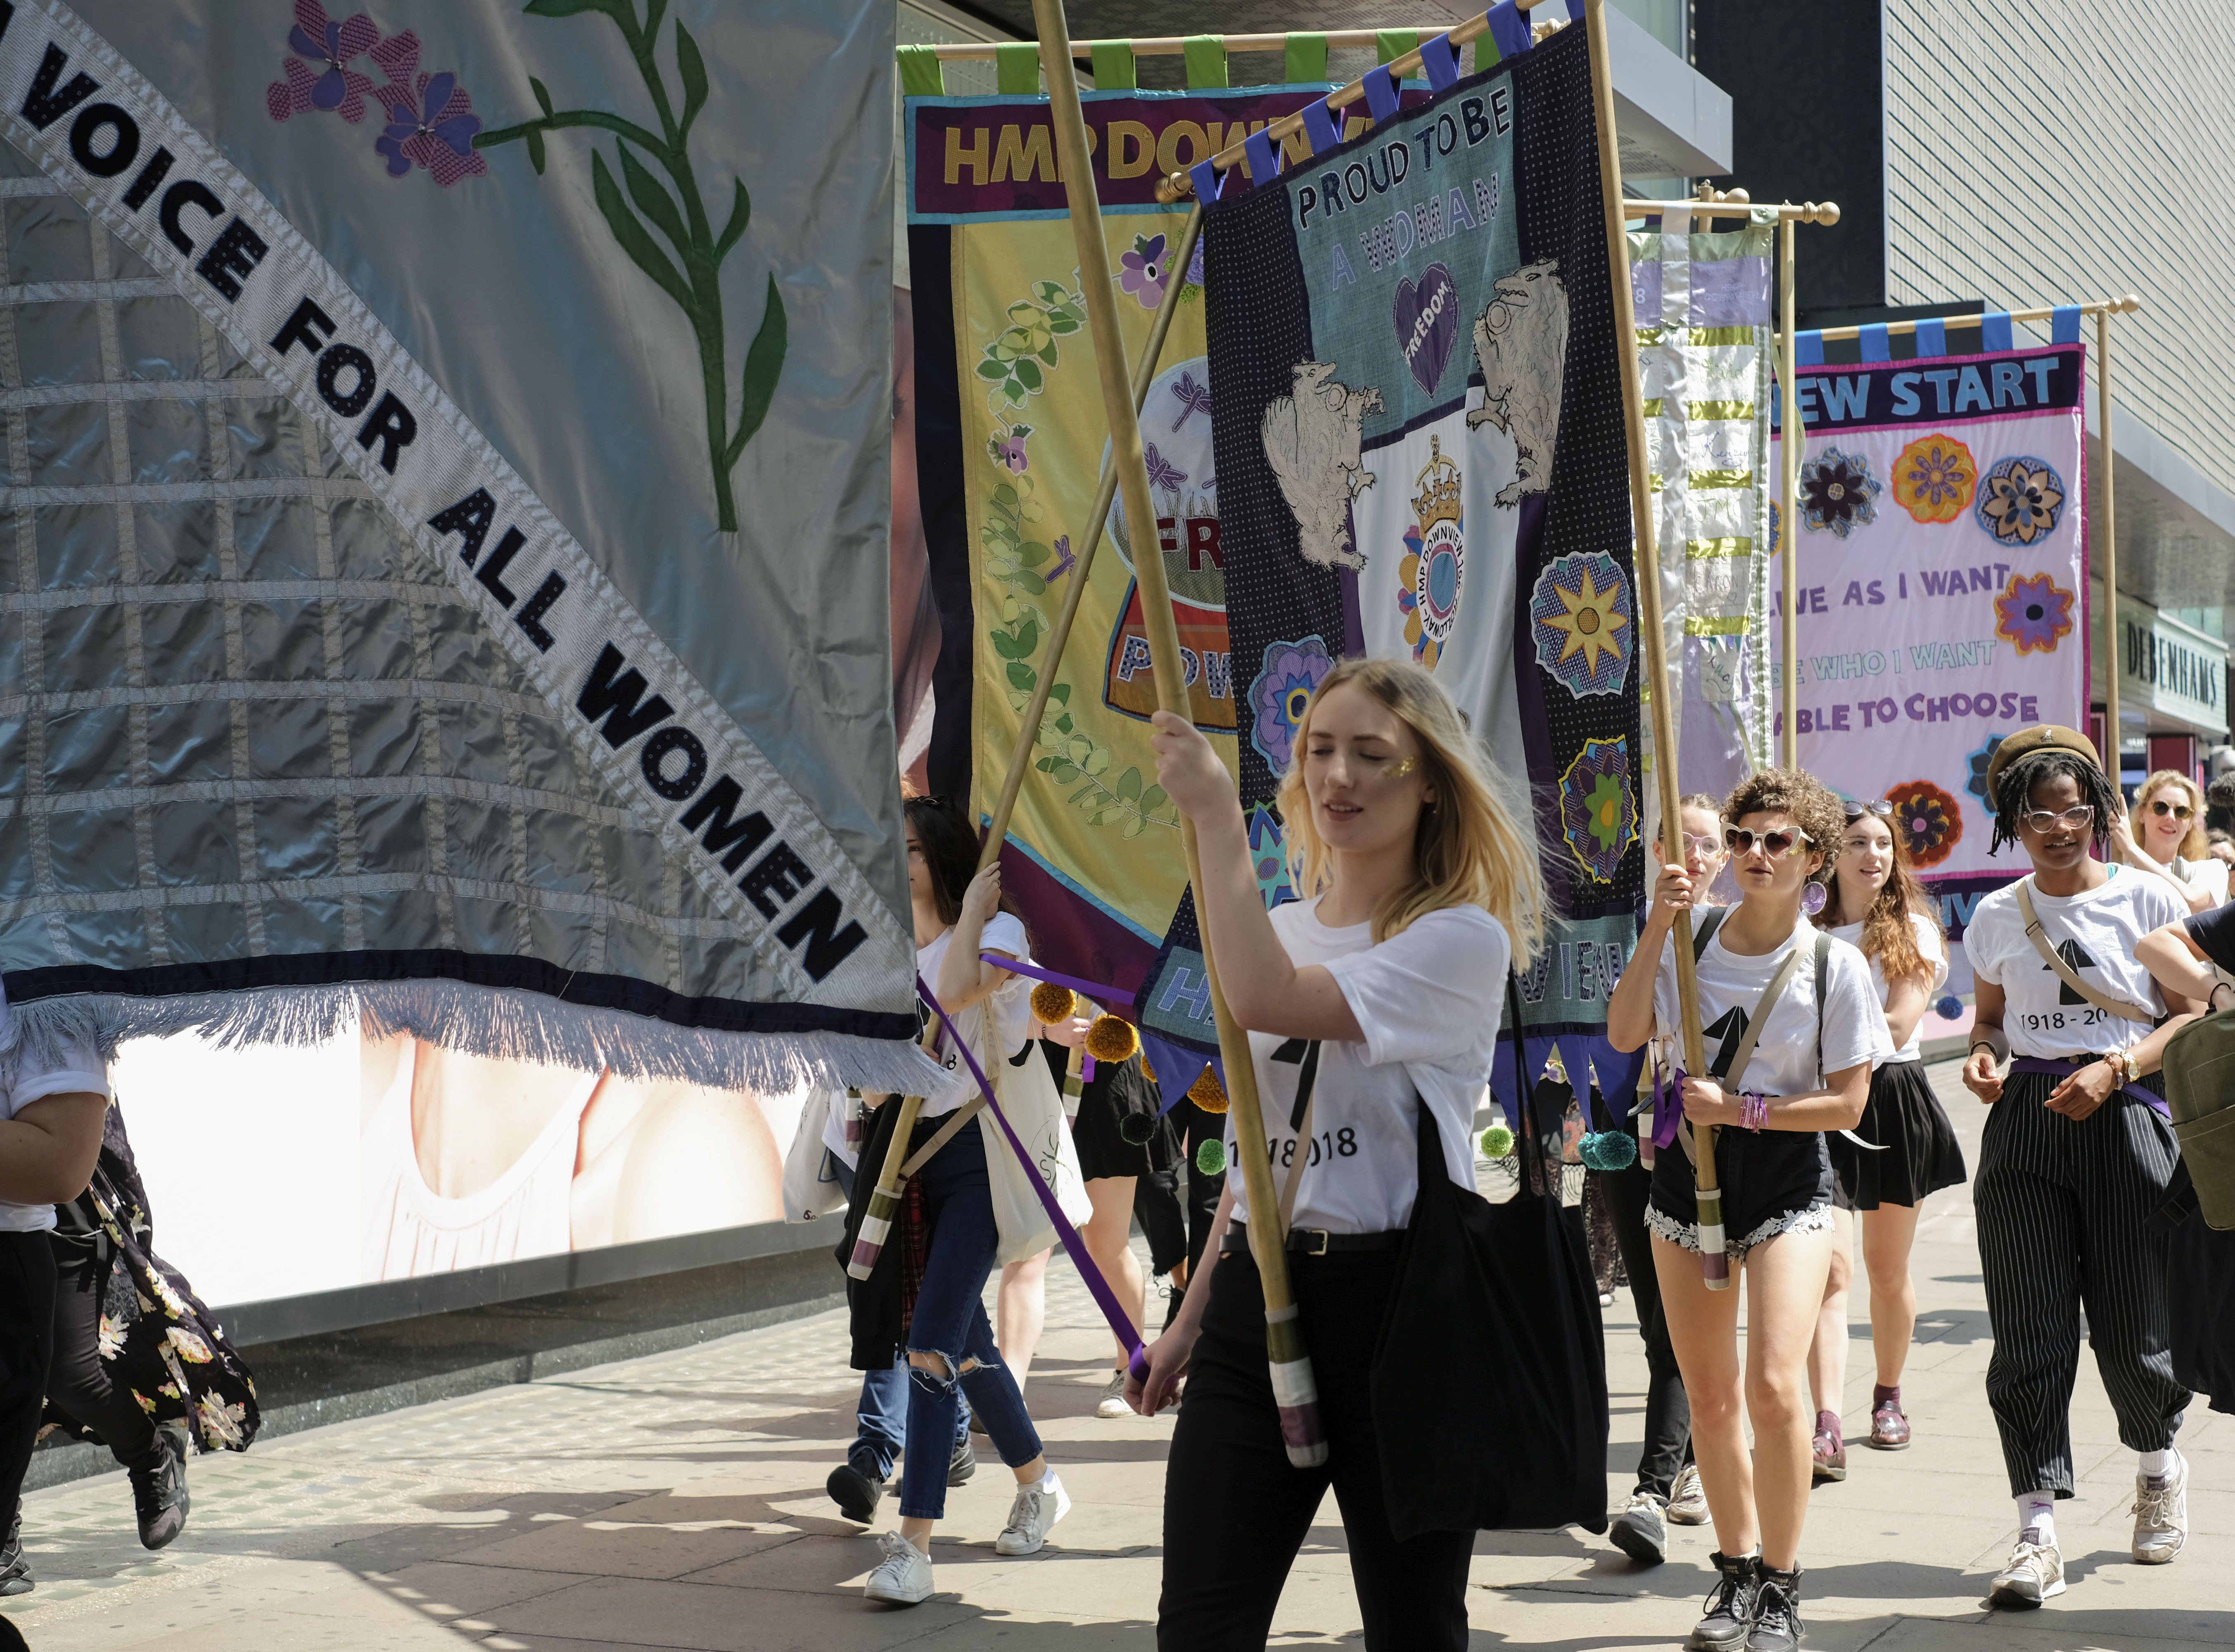 London College of Fashion students march with the banners in the sunshine.